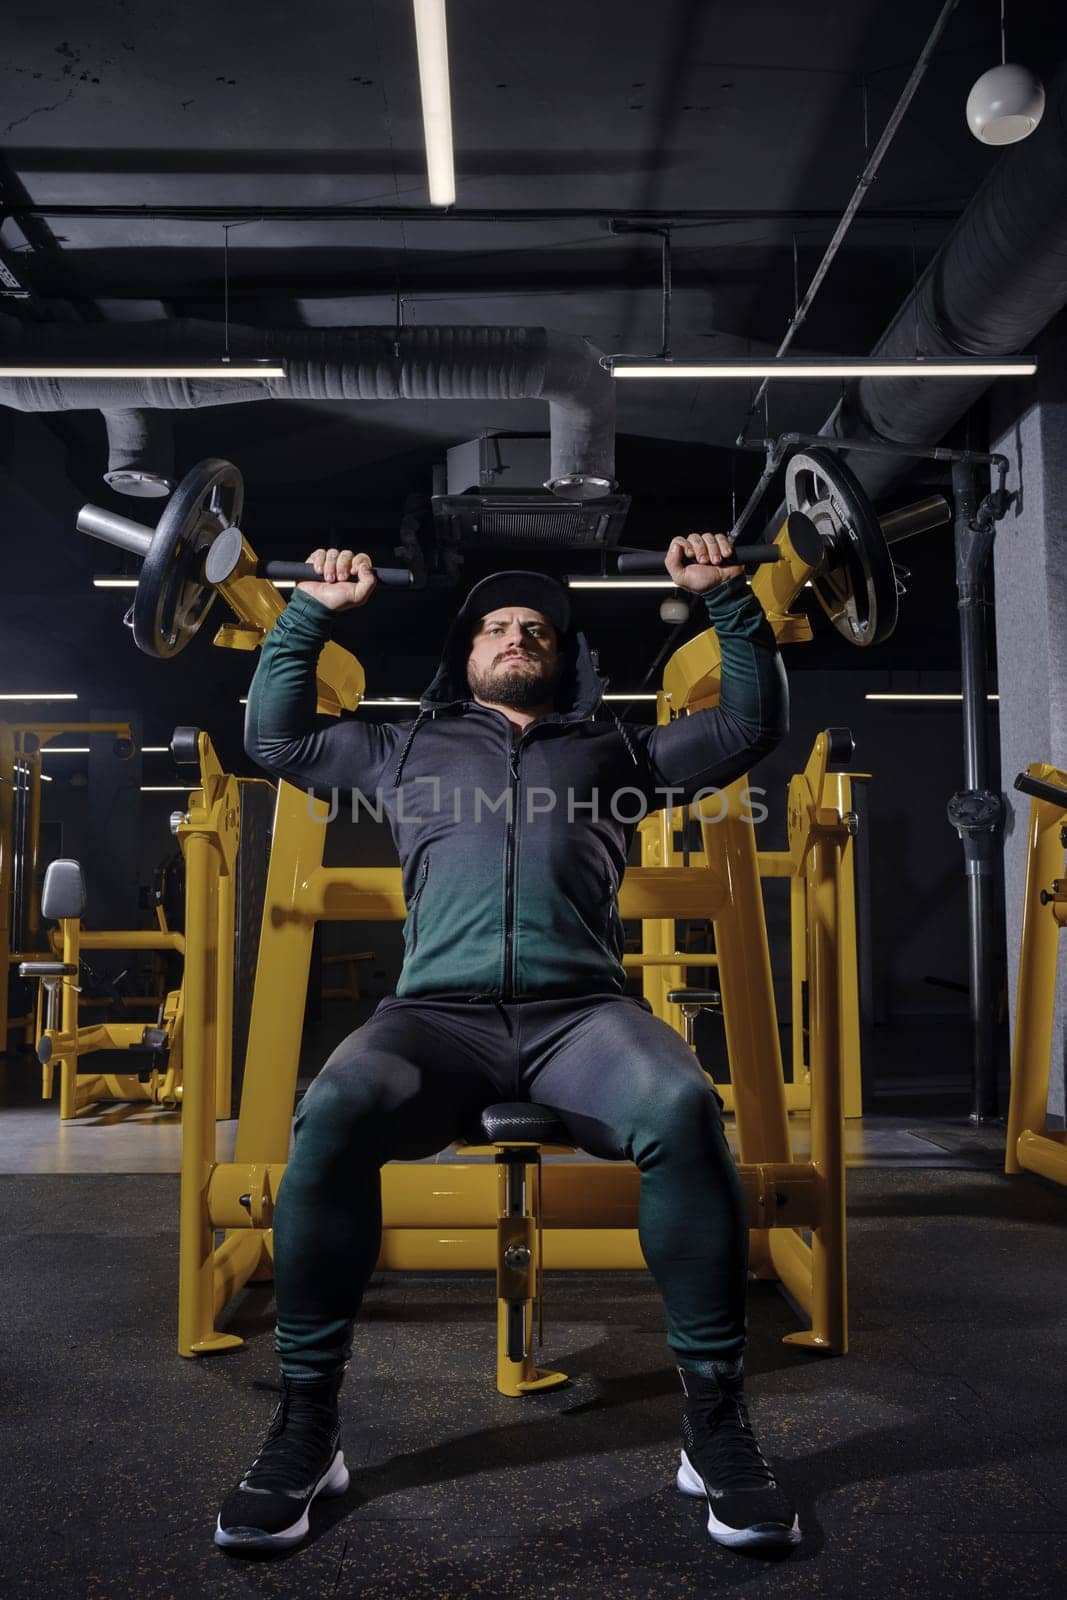 Attractive, bearded sportsman in black tracksuit with a hood, cap and sneakers. He performing a chest press while sitting on an exercise machine, posing in dark gym with yellow equipment. Full length